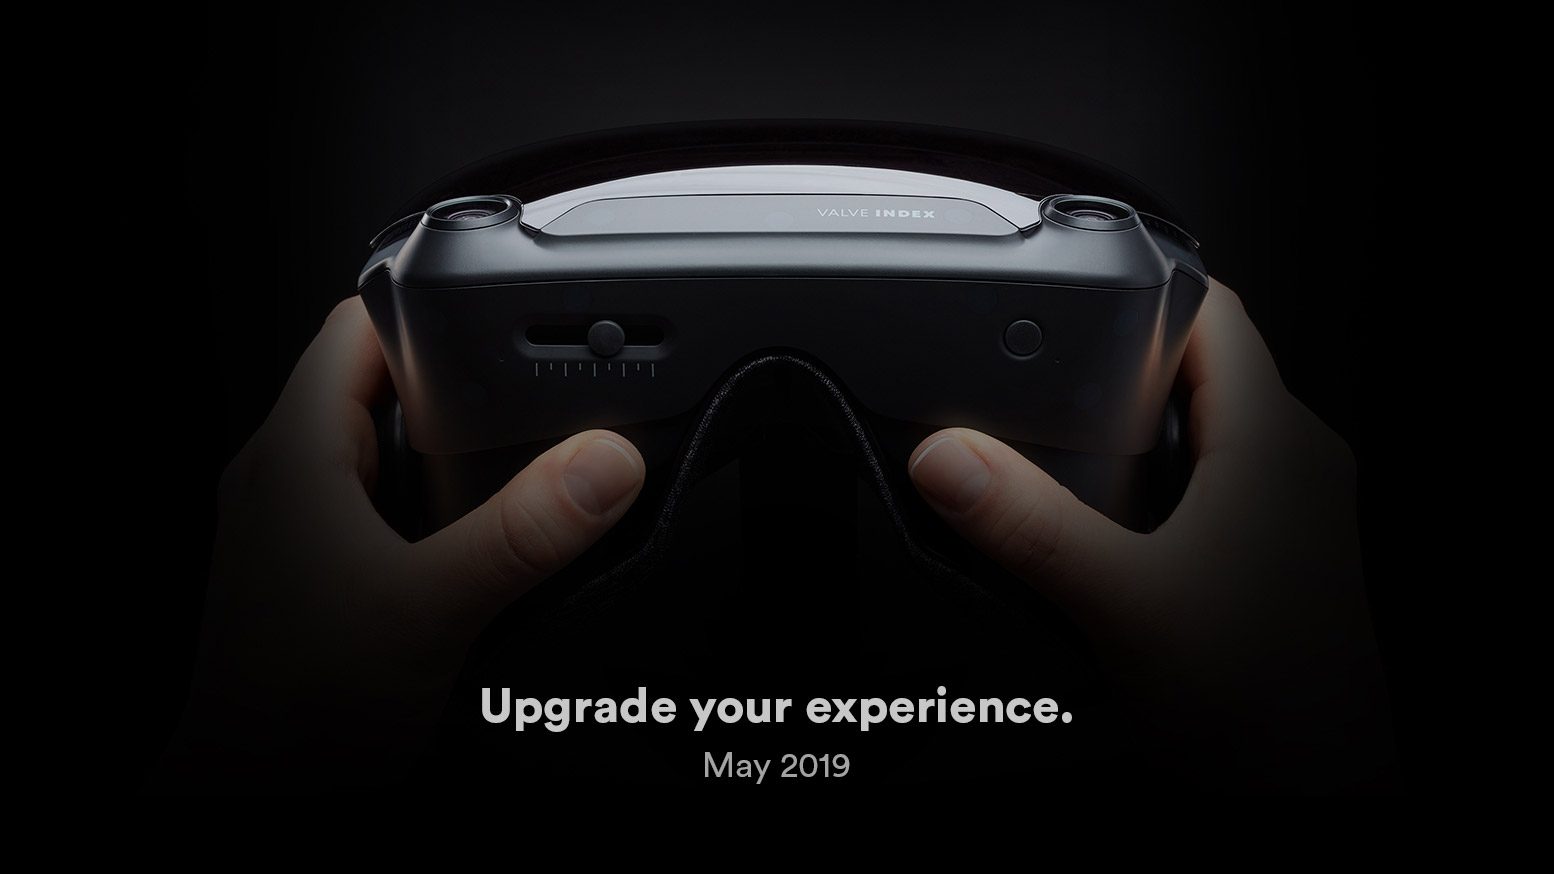 Valve Teases New VR Headset 'Index' Coming in May